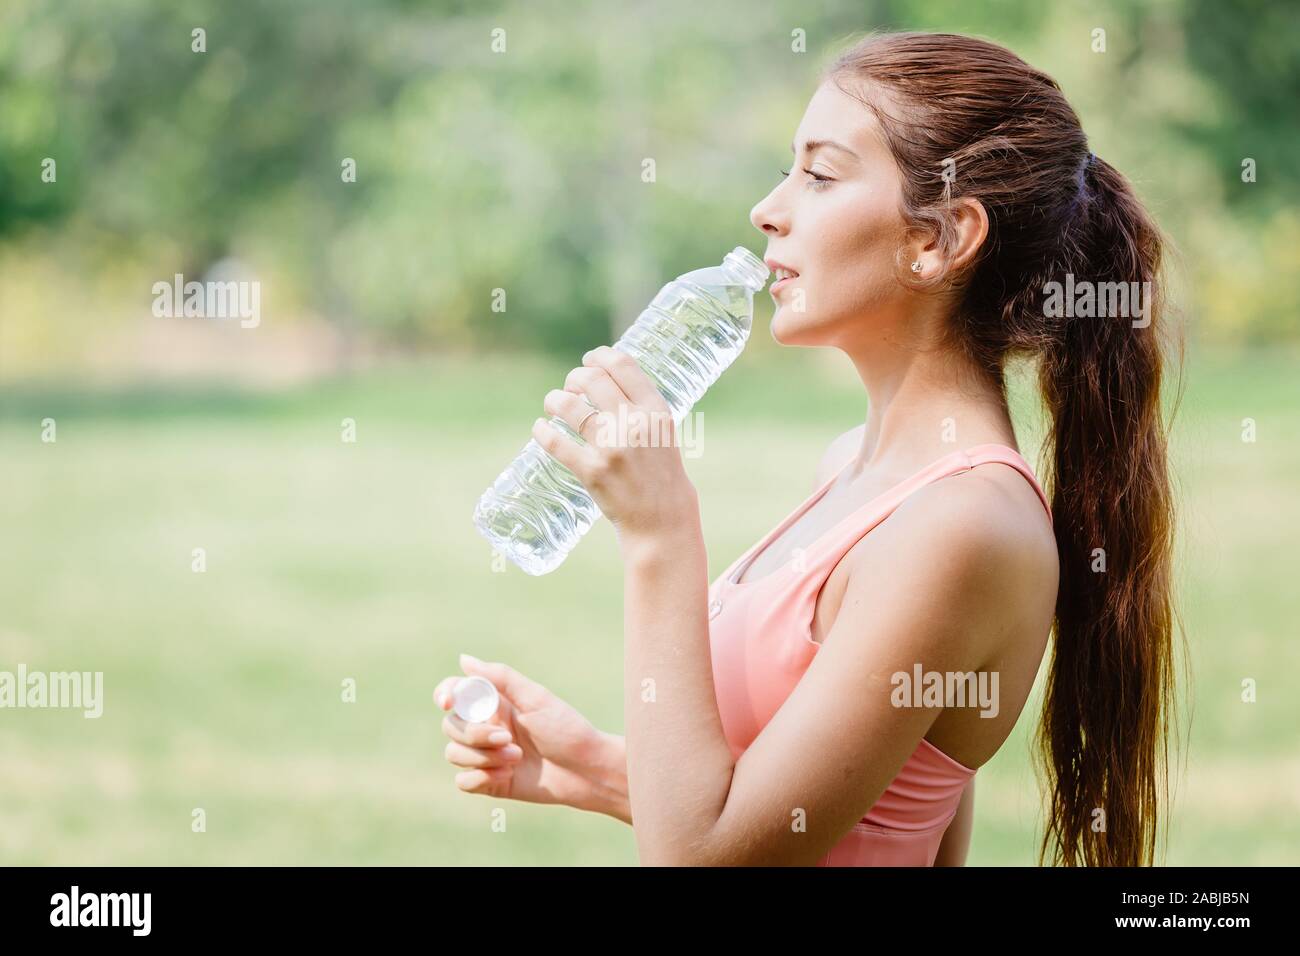 Thirsty beautiful sport women model handle drink clean drinking water outdoor after exercise. Stock Photo